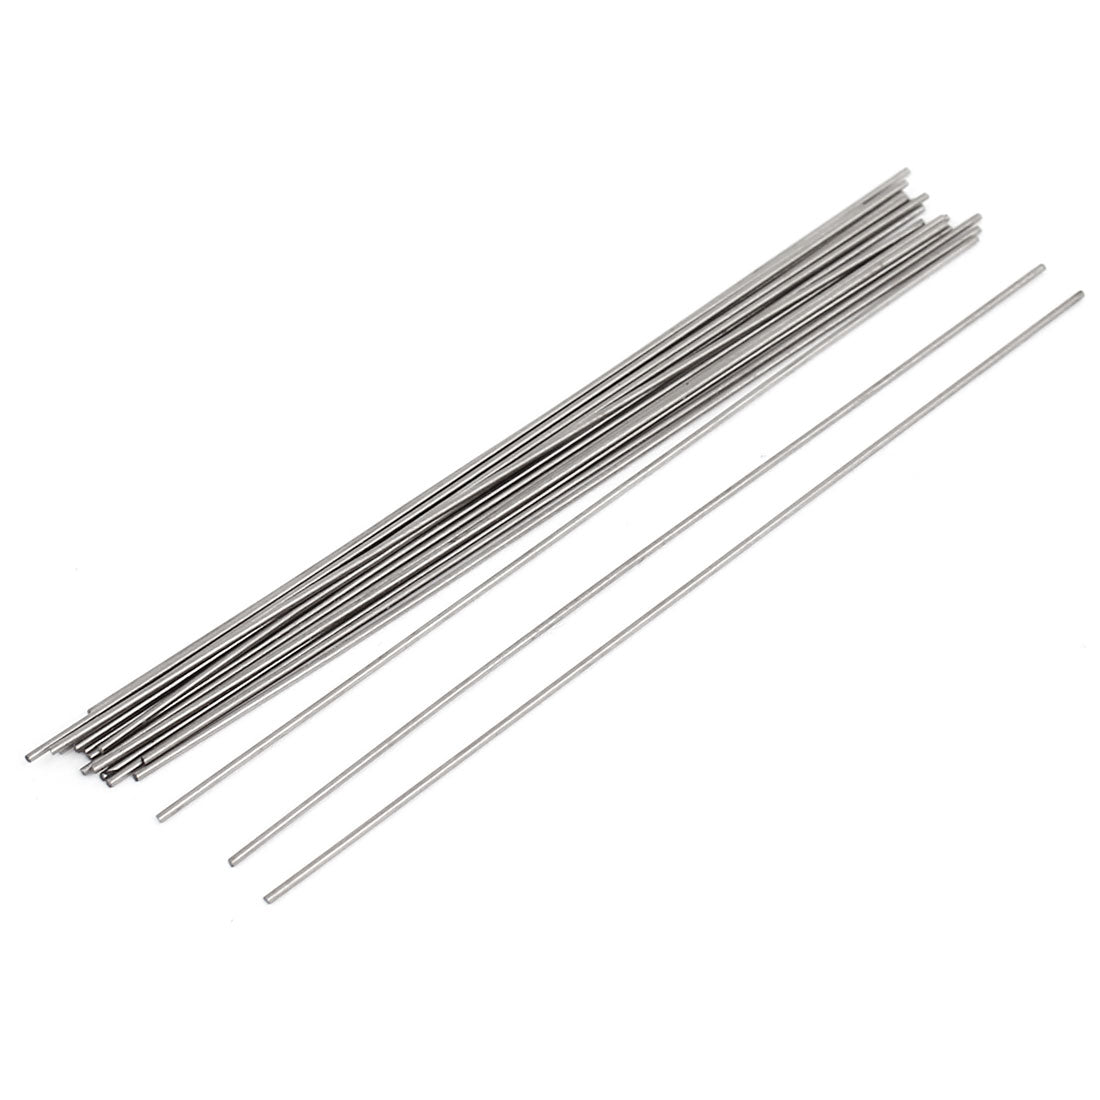 uxcell Uxcell 20pcs HSS High Speed Steel Turning Carbide Bars for CNC Lathe 0.6mmx100mm